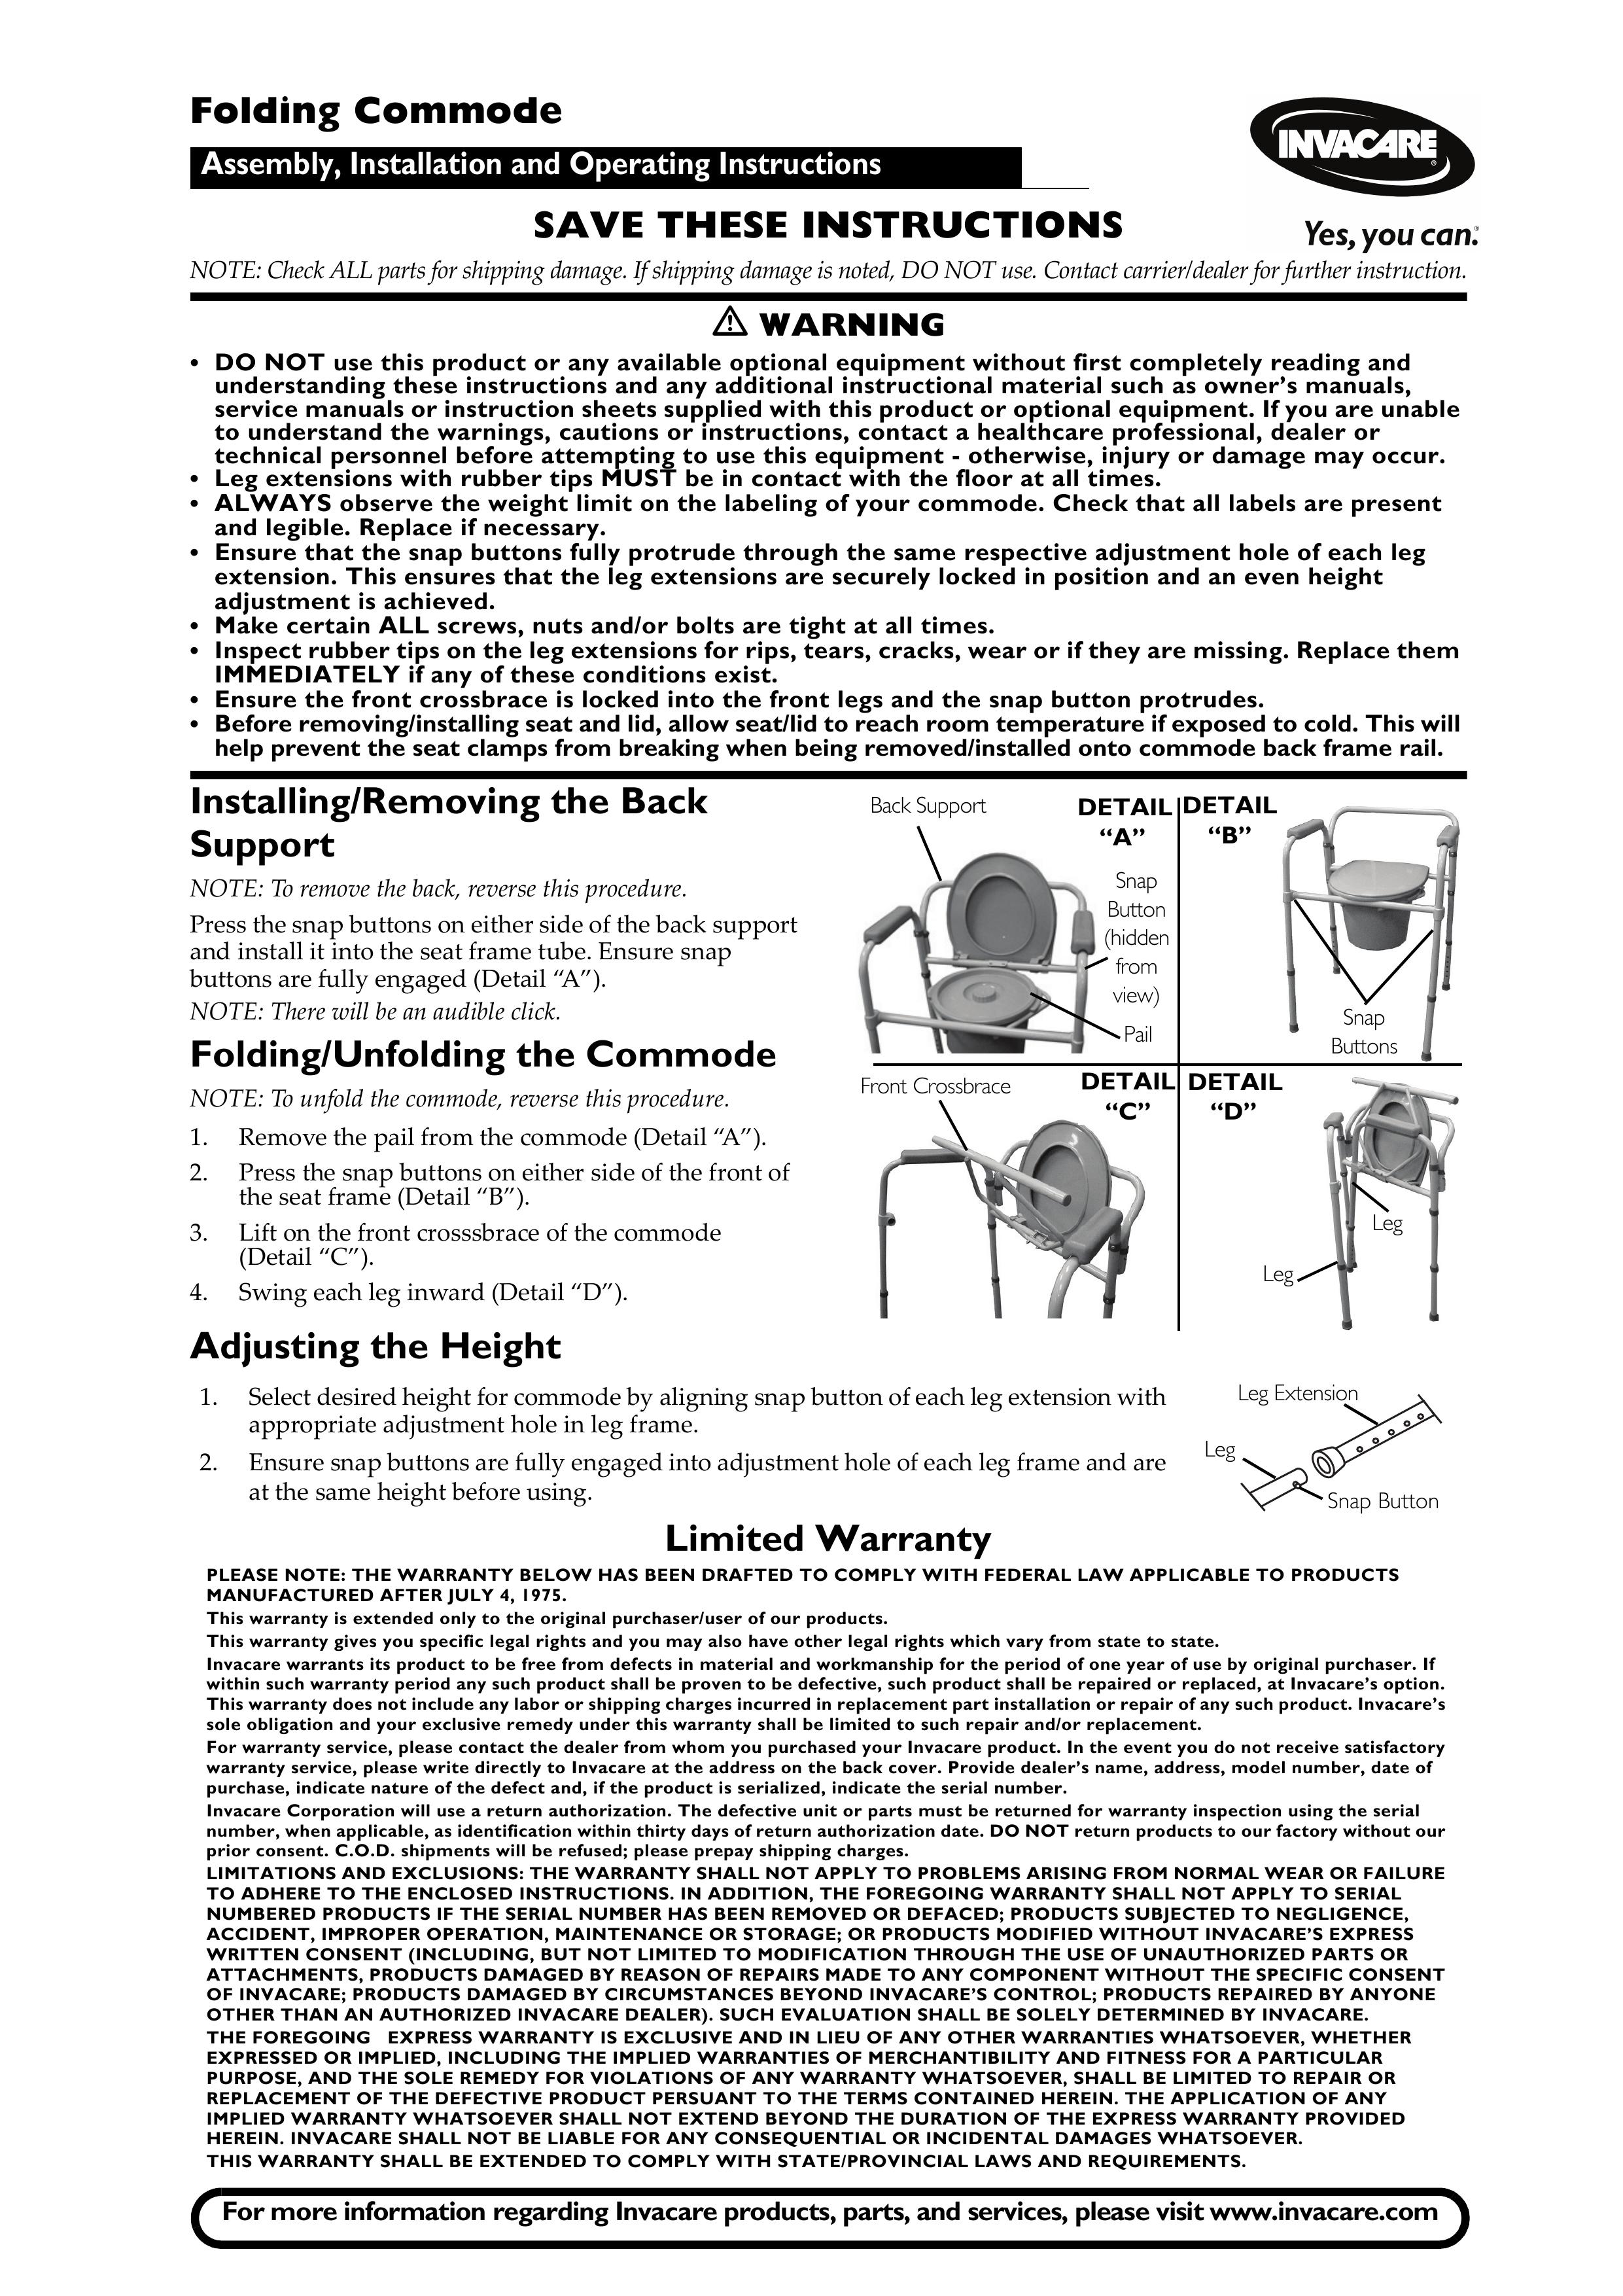 Invacare Folding Commode Home Care Product User Manual